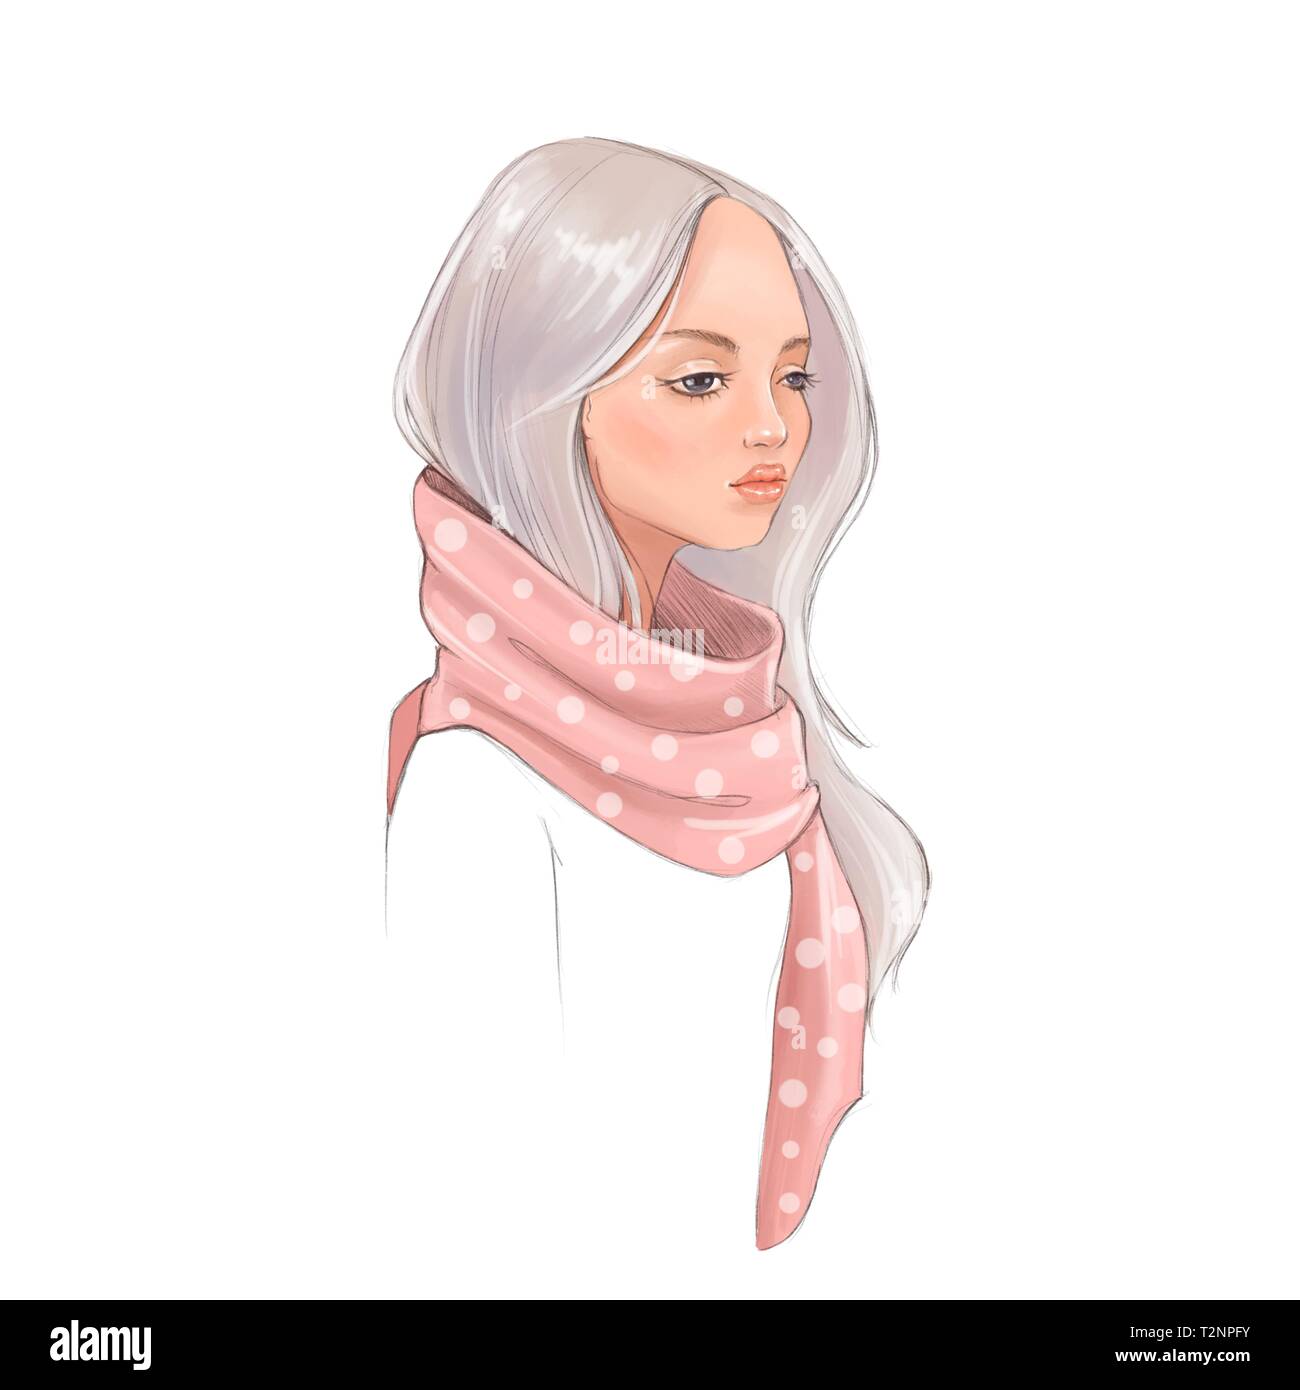 Beautiful girl in scarf. Digital illustration, isolated on white Stock Photo